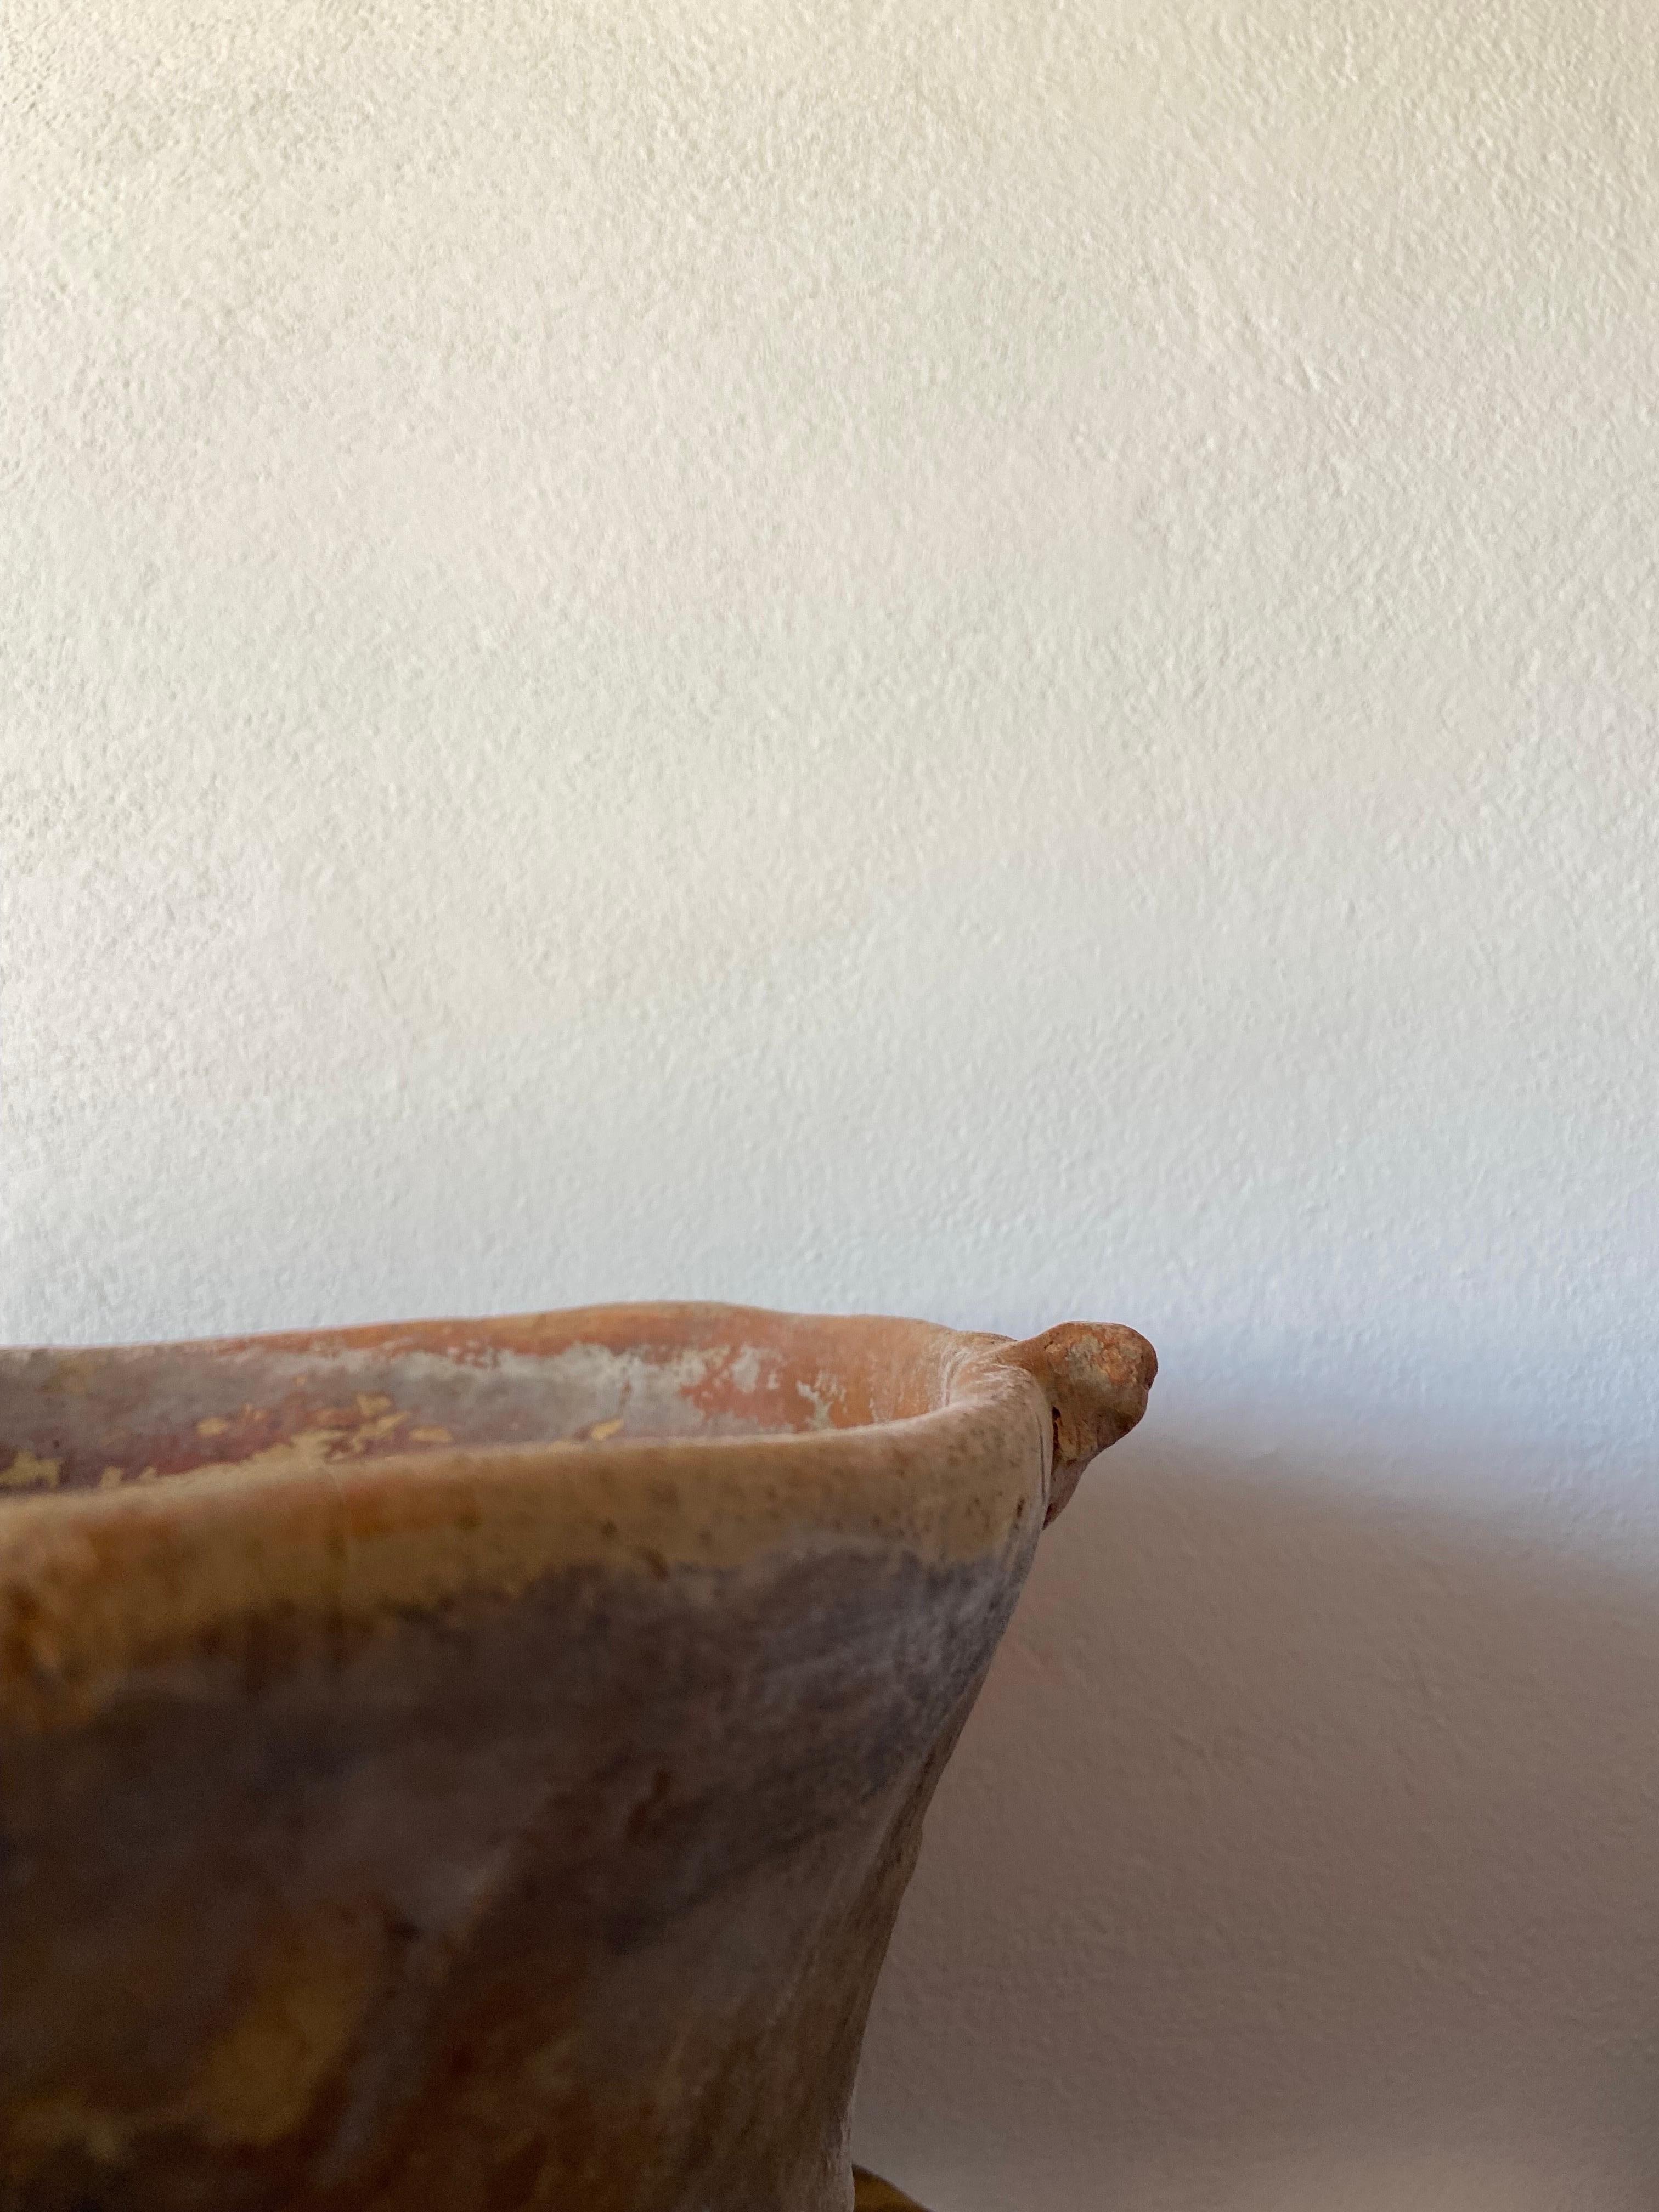 Rustic Terracotta Bowl From Mexico, Circa 1960´s